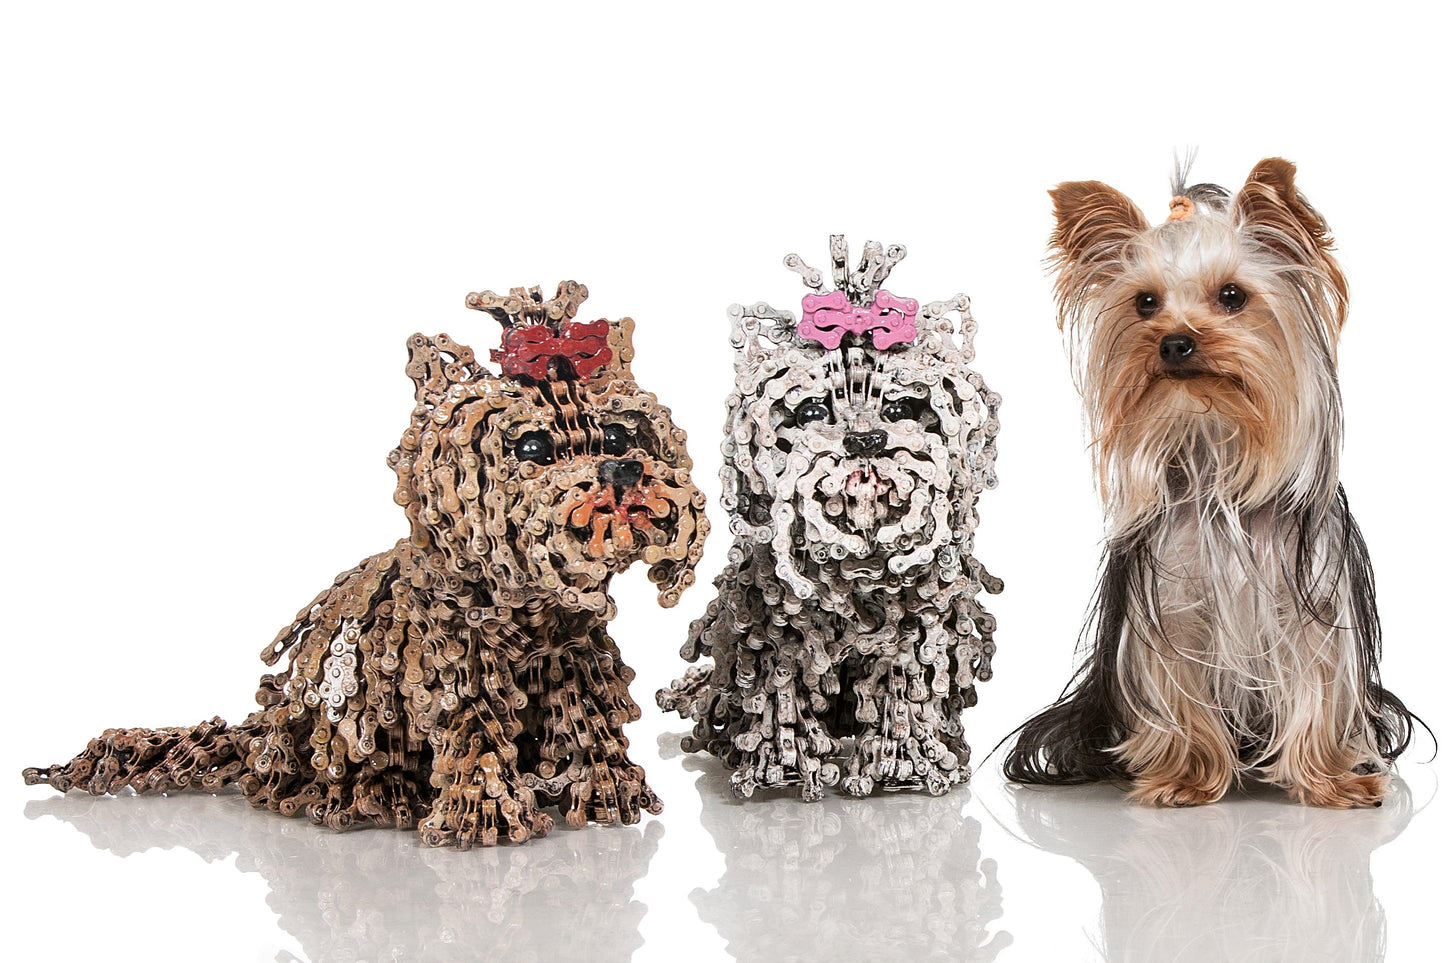 Baby Choo - dog sculpture, made of bicycle chains | UNCHAINED by NIRIT LEVAV PACKER